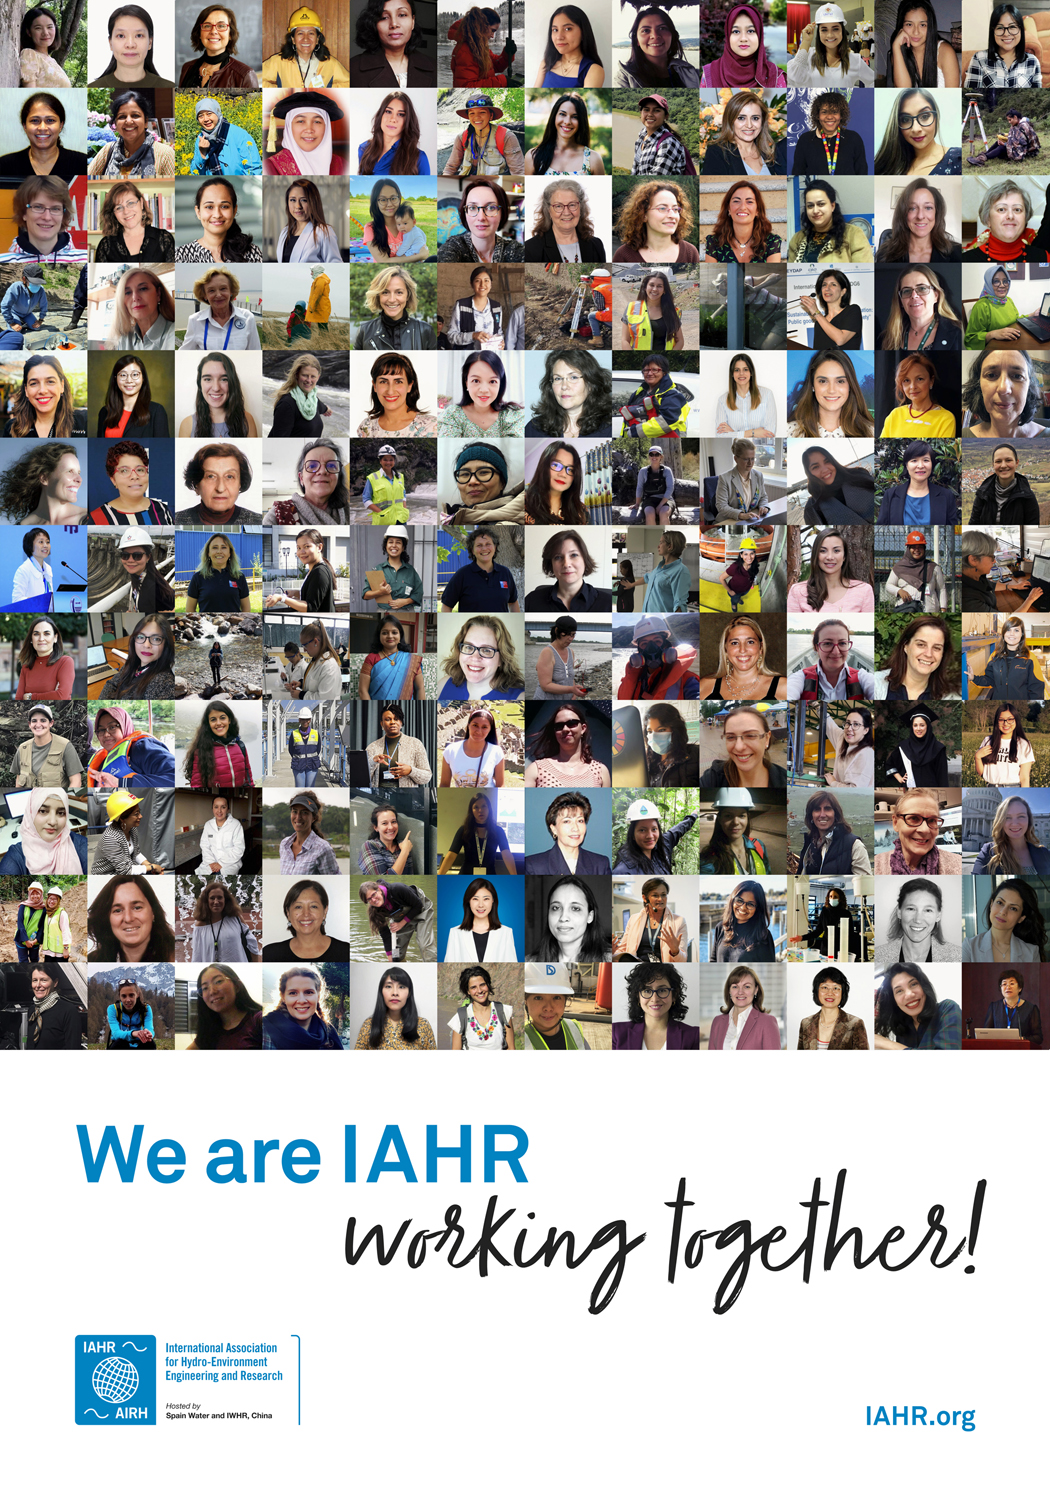 Download: We are IAHR working together! Poster